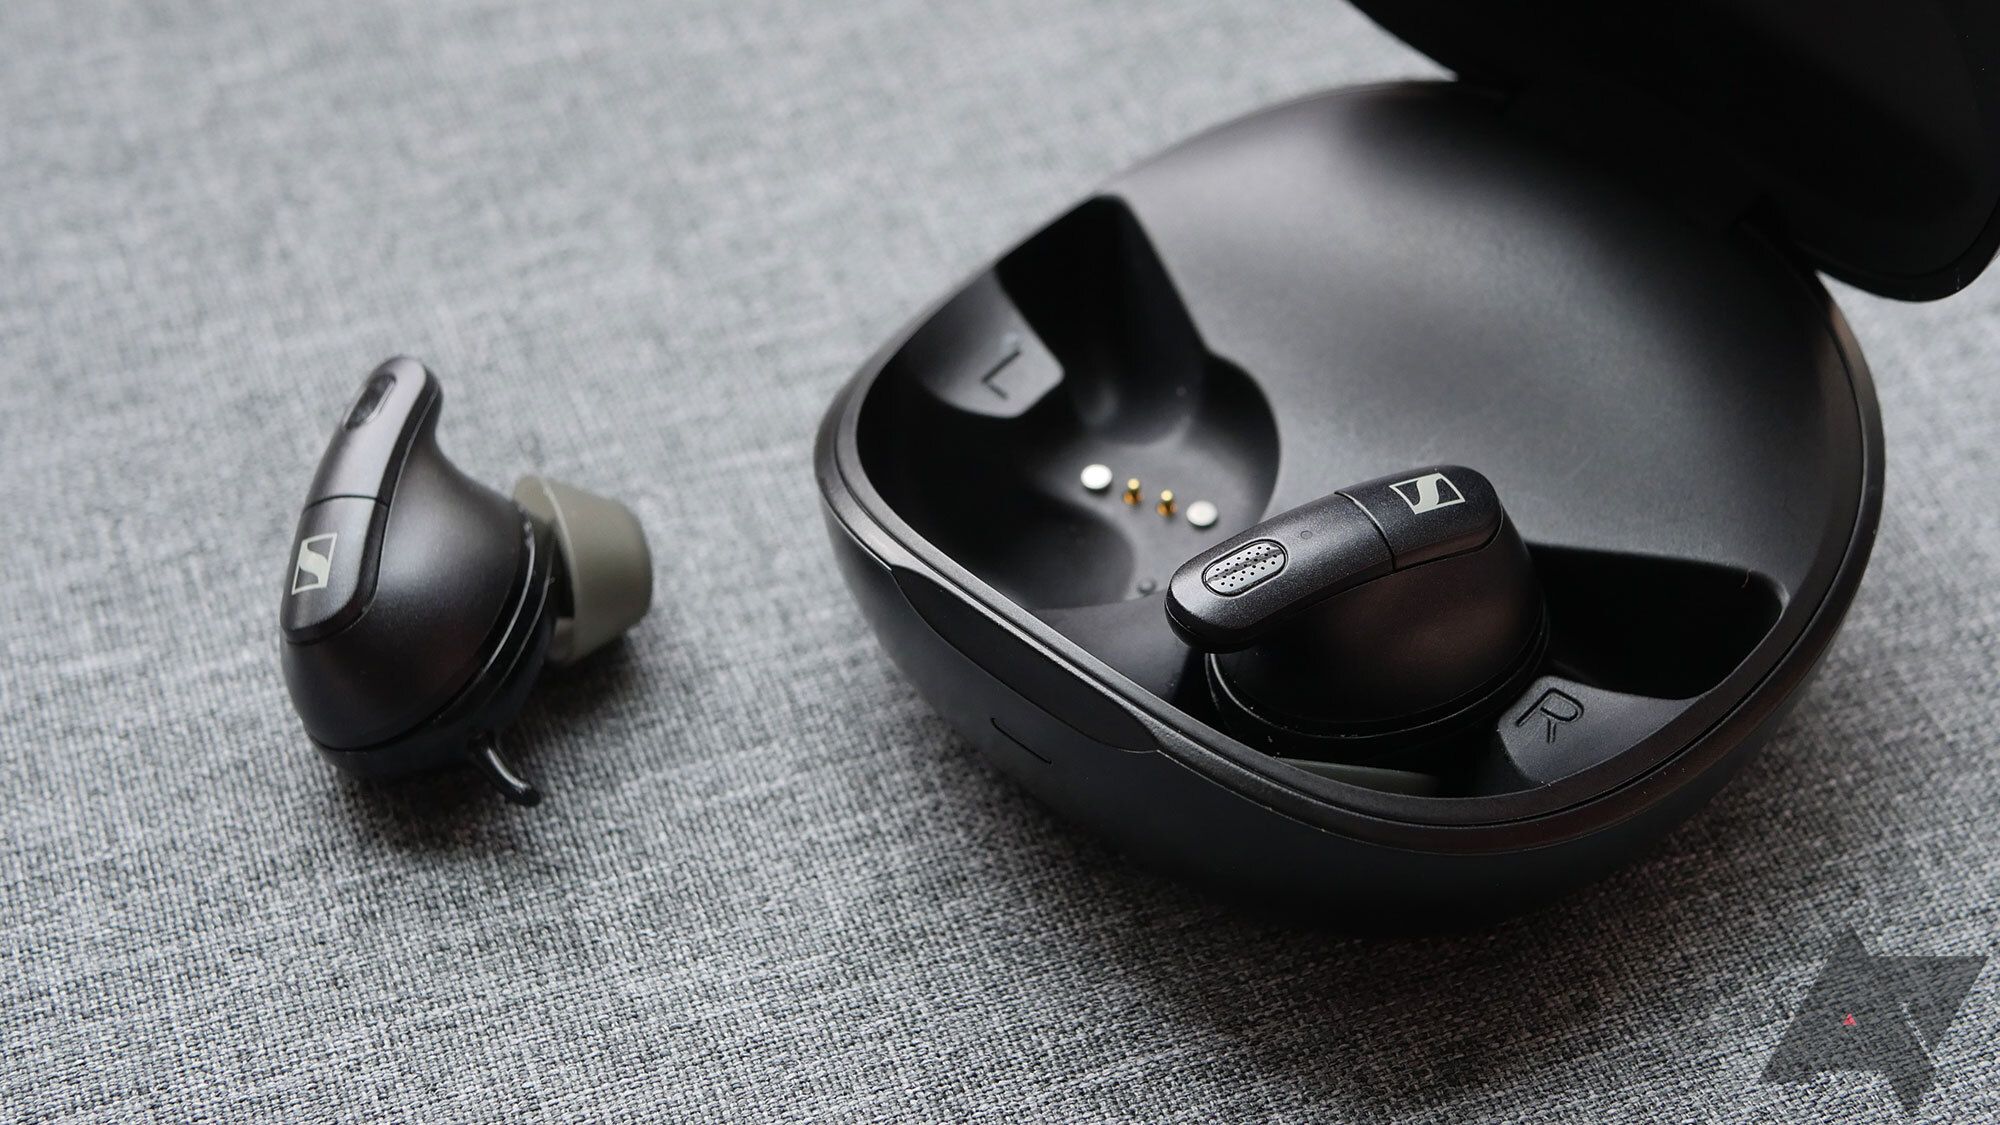 Sennheiser Conversation Clear Plus earbuds, with one of them inside their charging case and the other lying next to it